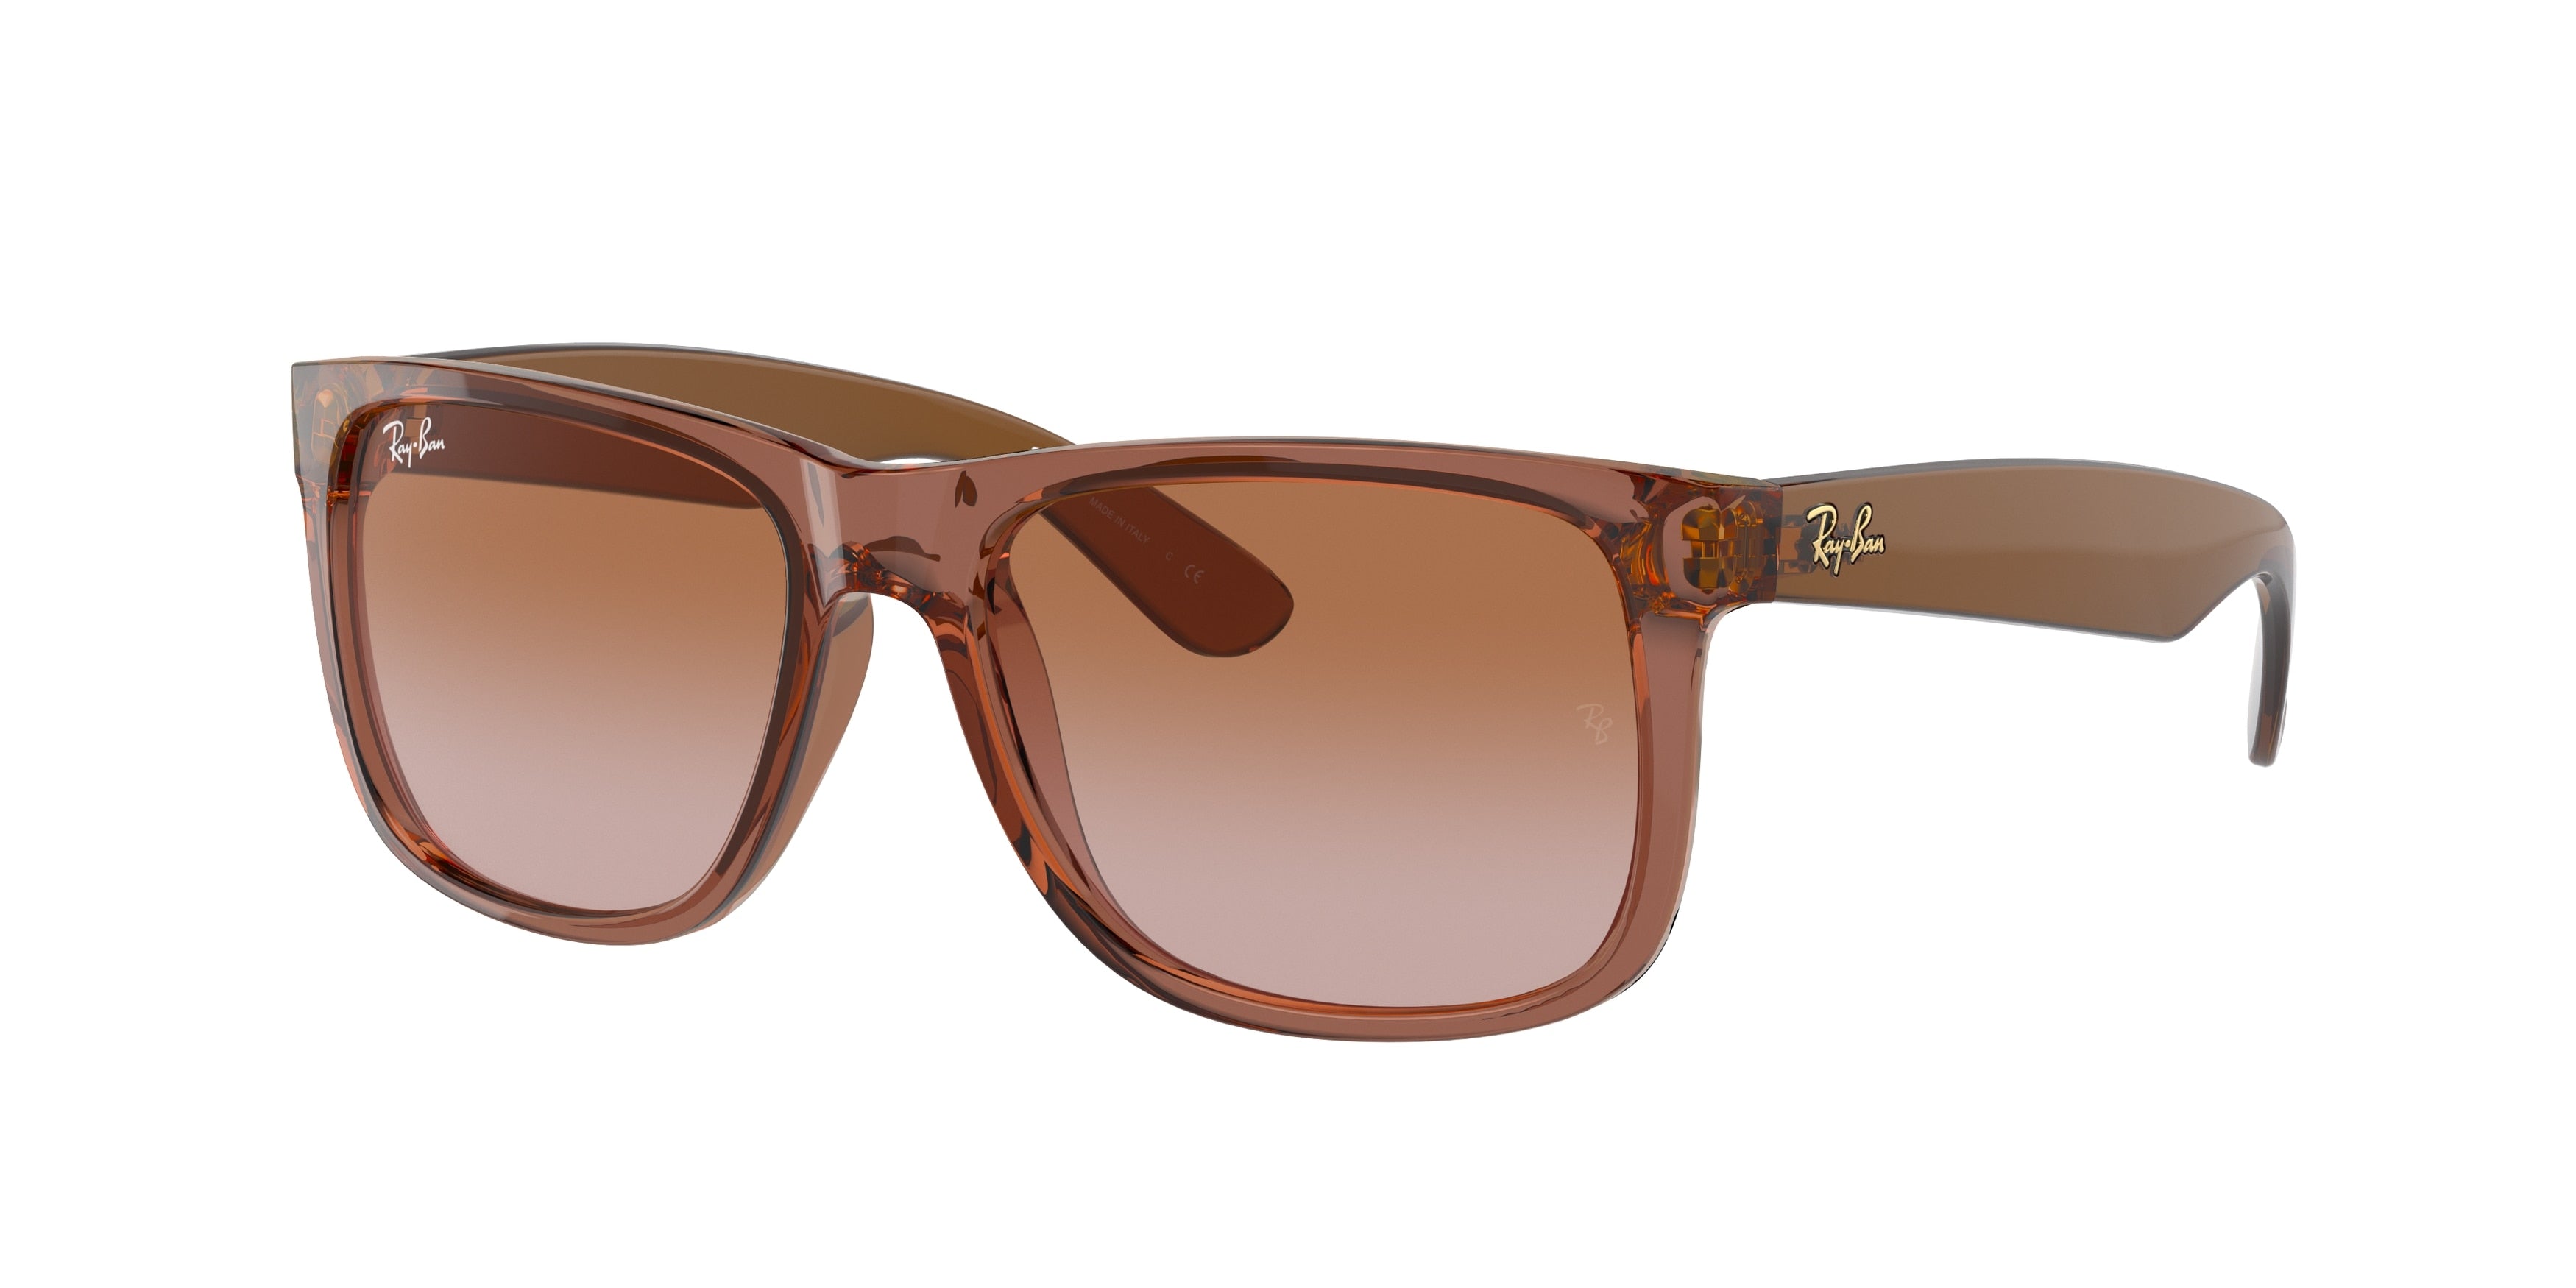 Ray-Ban JUSTIN RB4165 Square Sunglasses  659413-Transparent Light Brown 53-145-16 - Color Map Beige